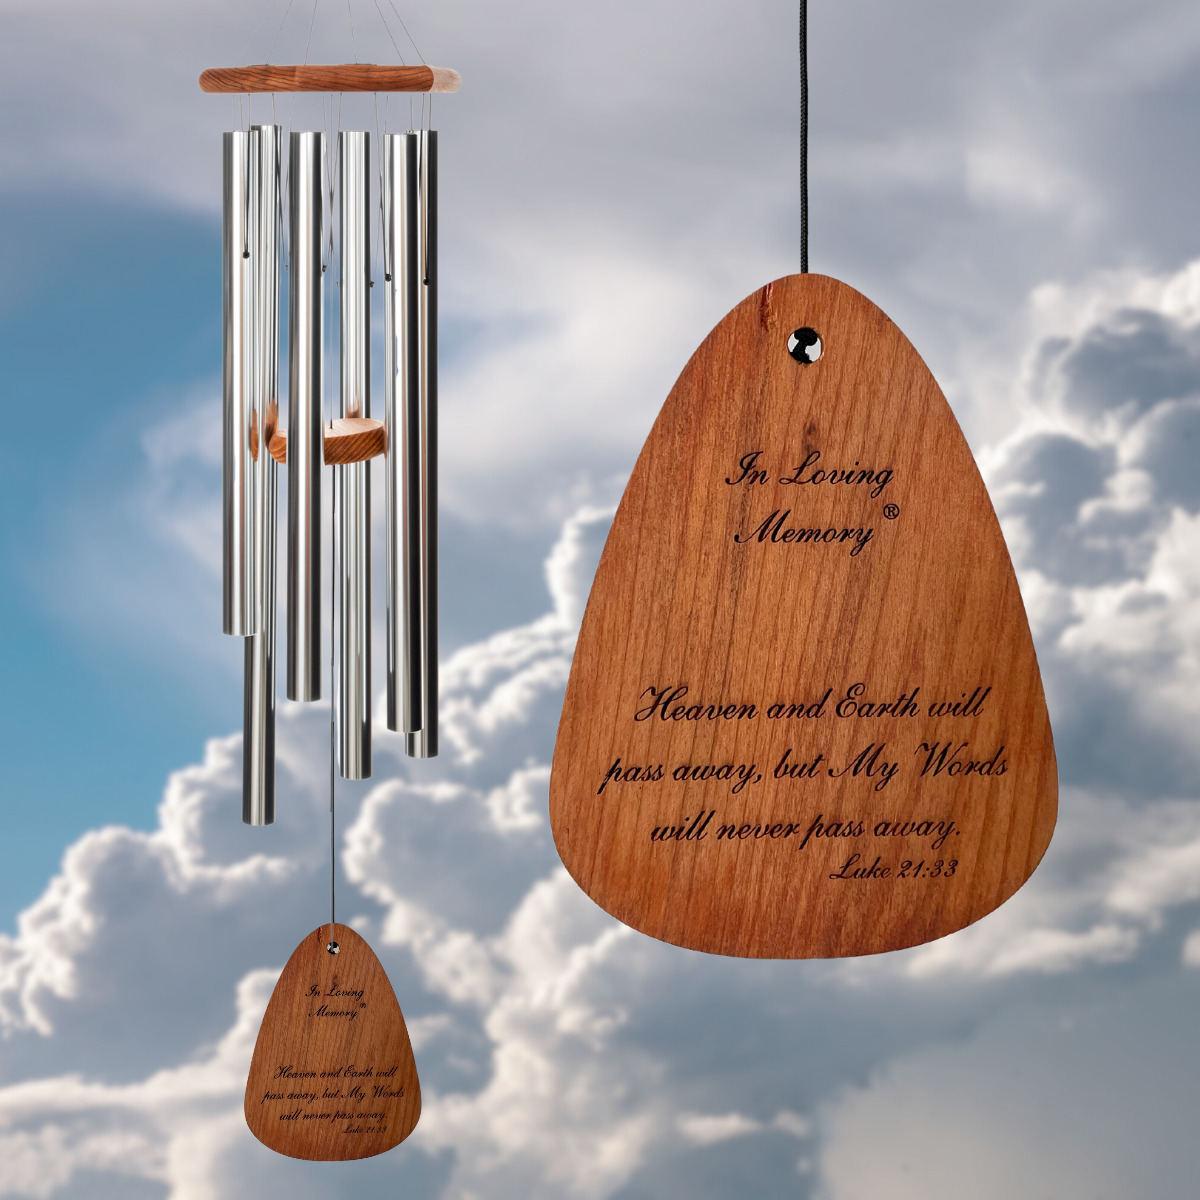 In Loving Memory 42 Inch Windchime - ..My Words will never pass away.... in Silver